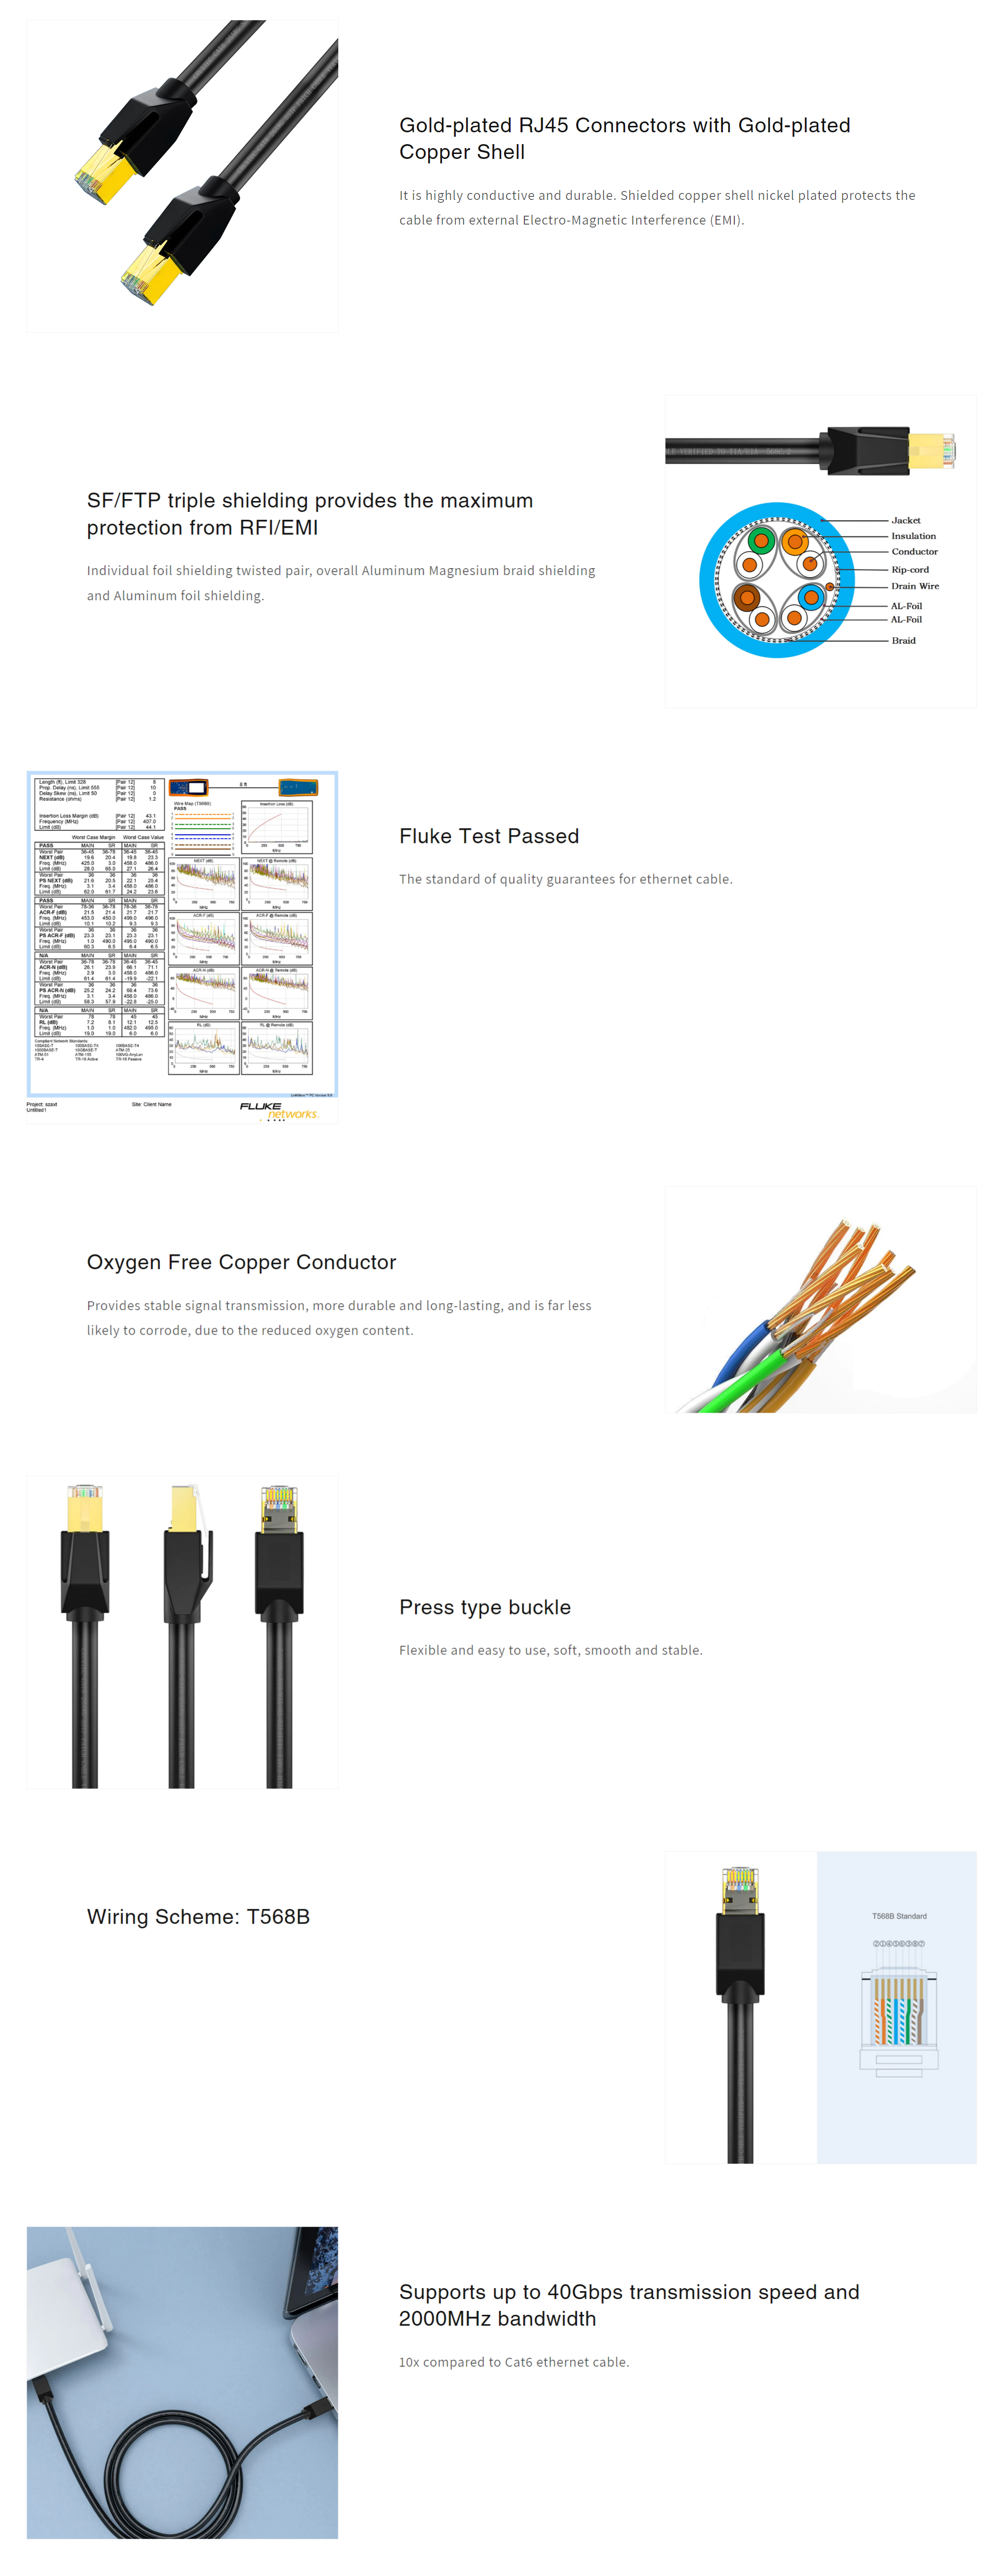 A large marketing image providing additional information about the product Cruxtec CAT8 15m 40GbE SF/FTP Triple Shielding Ethernet Cable Black - Additional alt info not provided